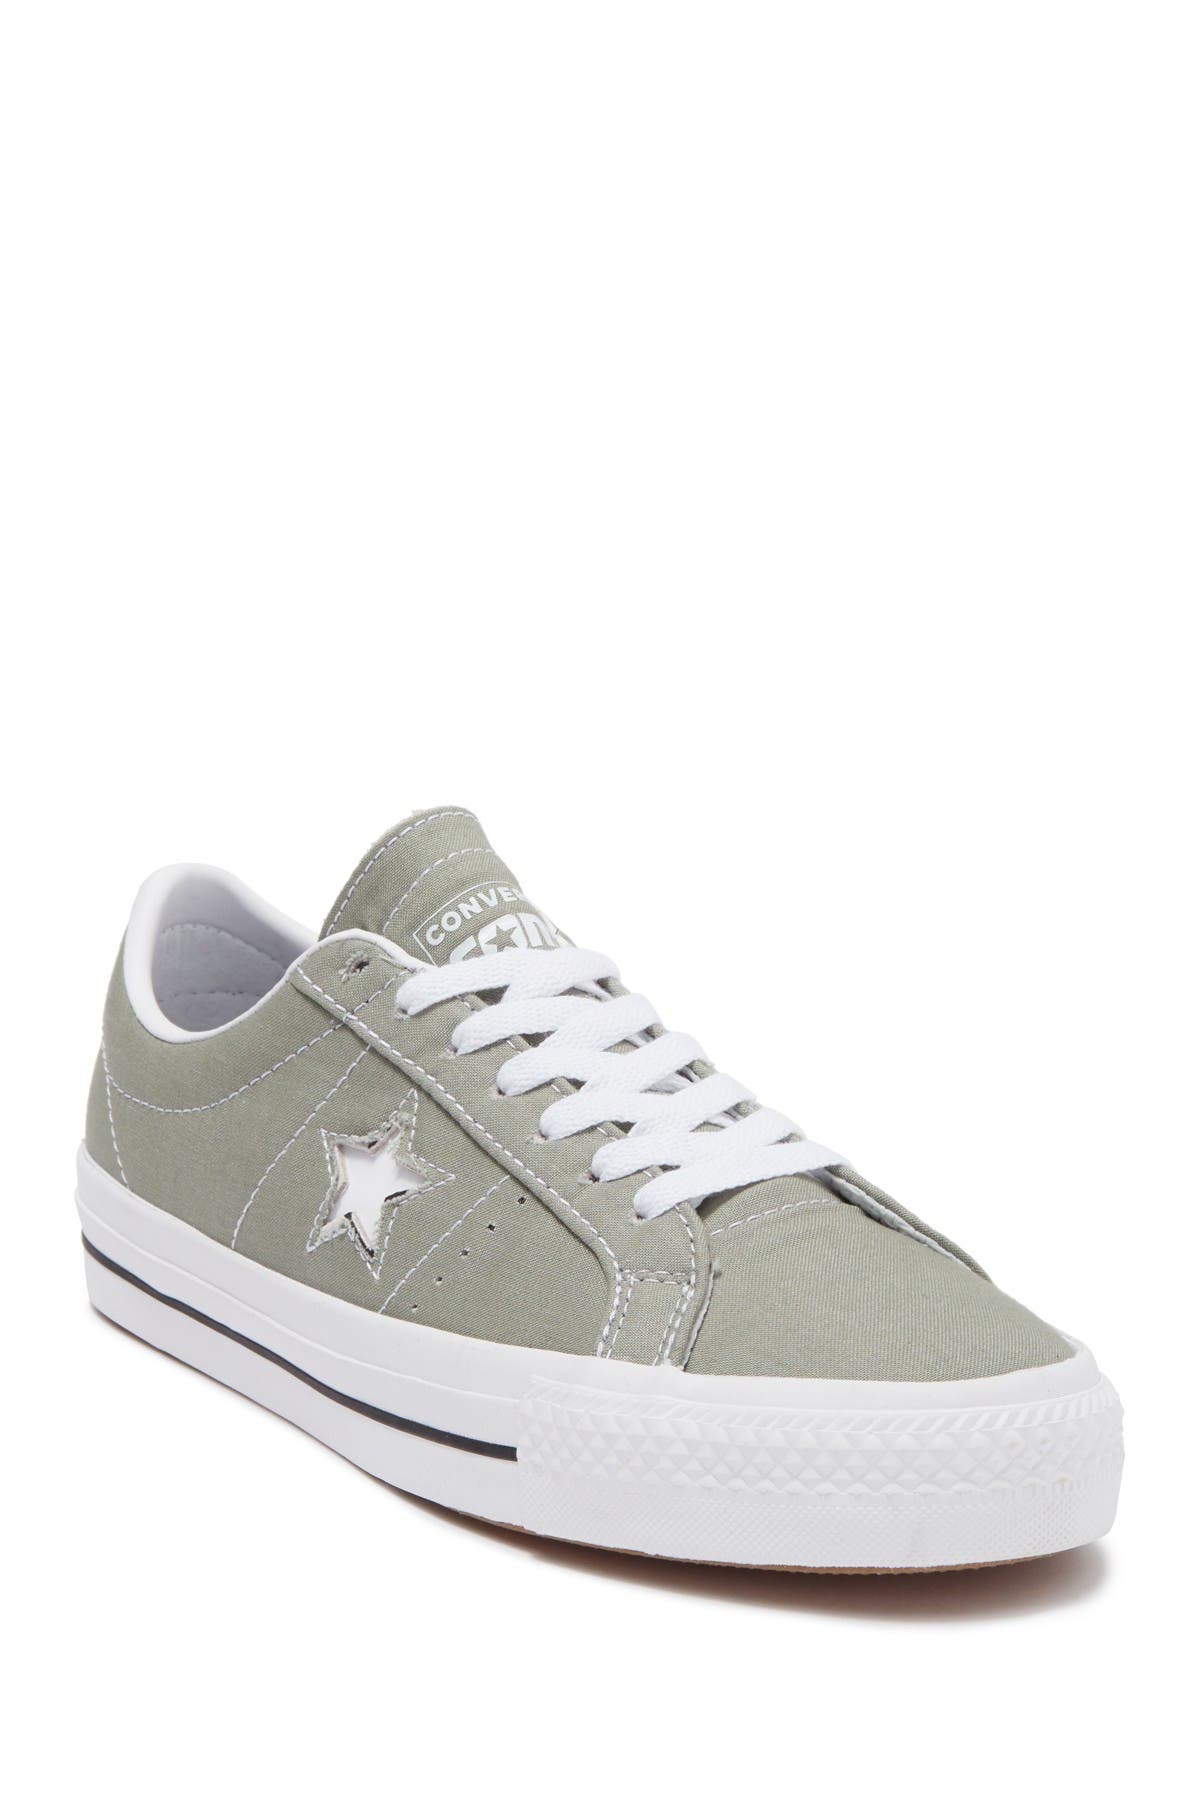 converse one star nordstrom